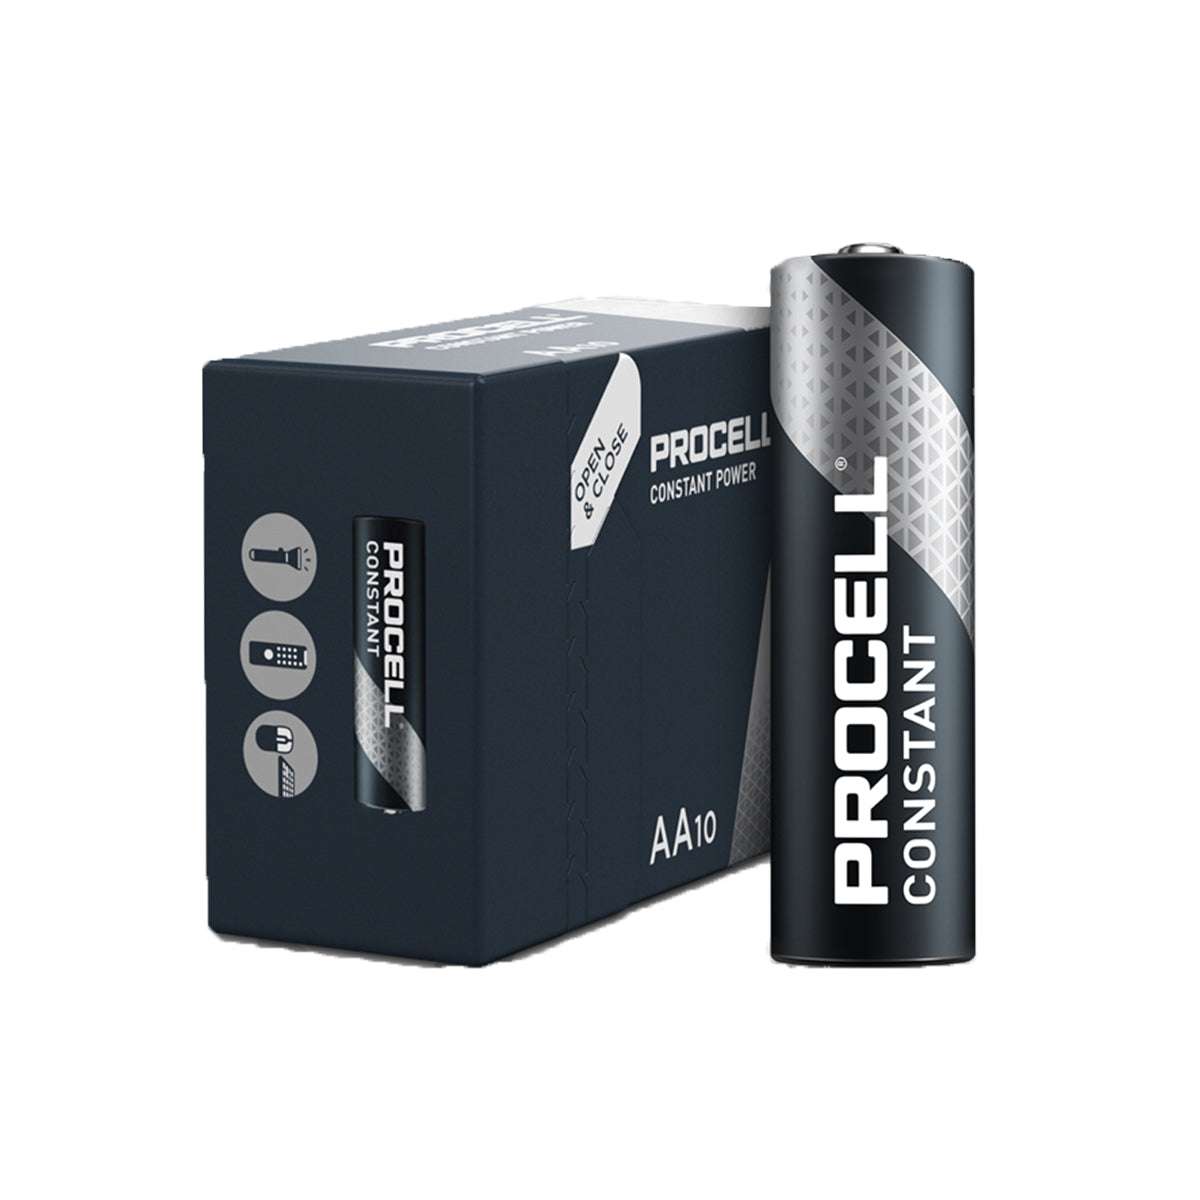 Constant Power AA 1.5V Professional Alkaline Batteries in packs of 10 - Procell